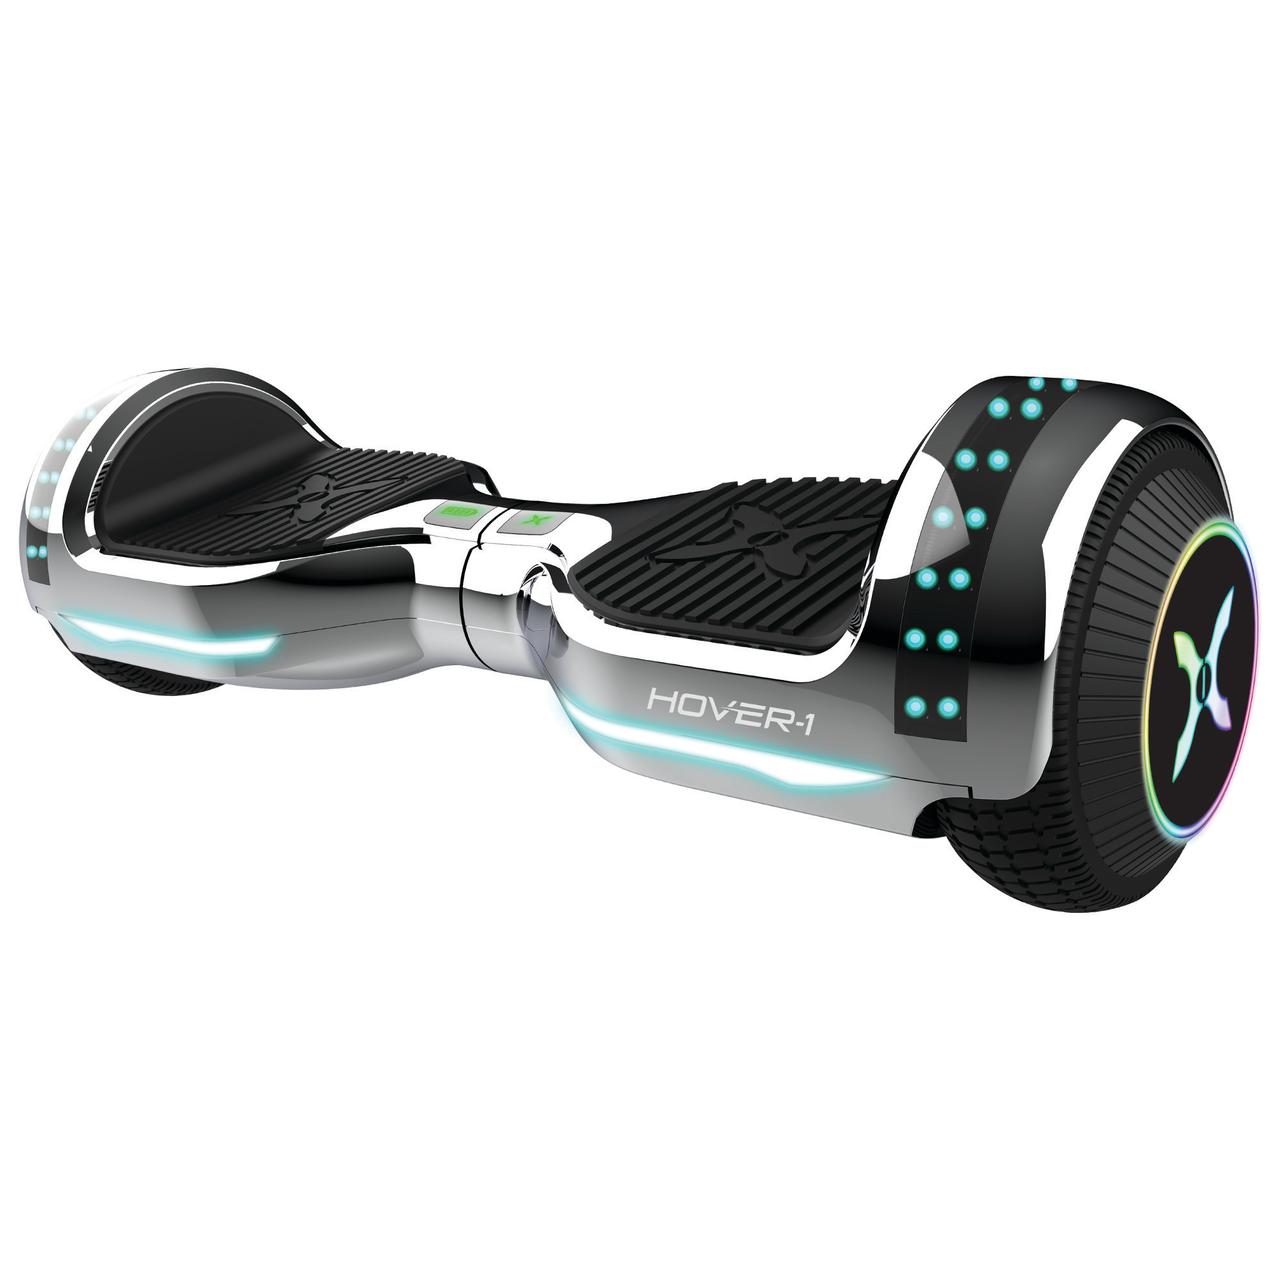 Hover-1 Matrix Hoverboard For Teens, 6.5 in Wheels, 180 lb Maximum Weight, LED Lights & Bluetooth Speaker, Silver - image 1 of 12